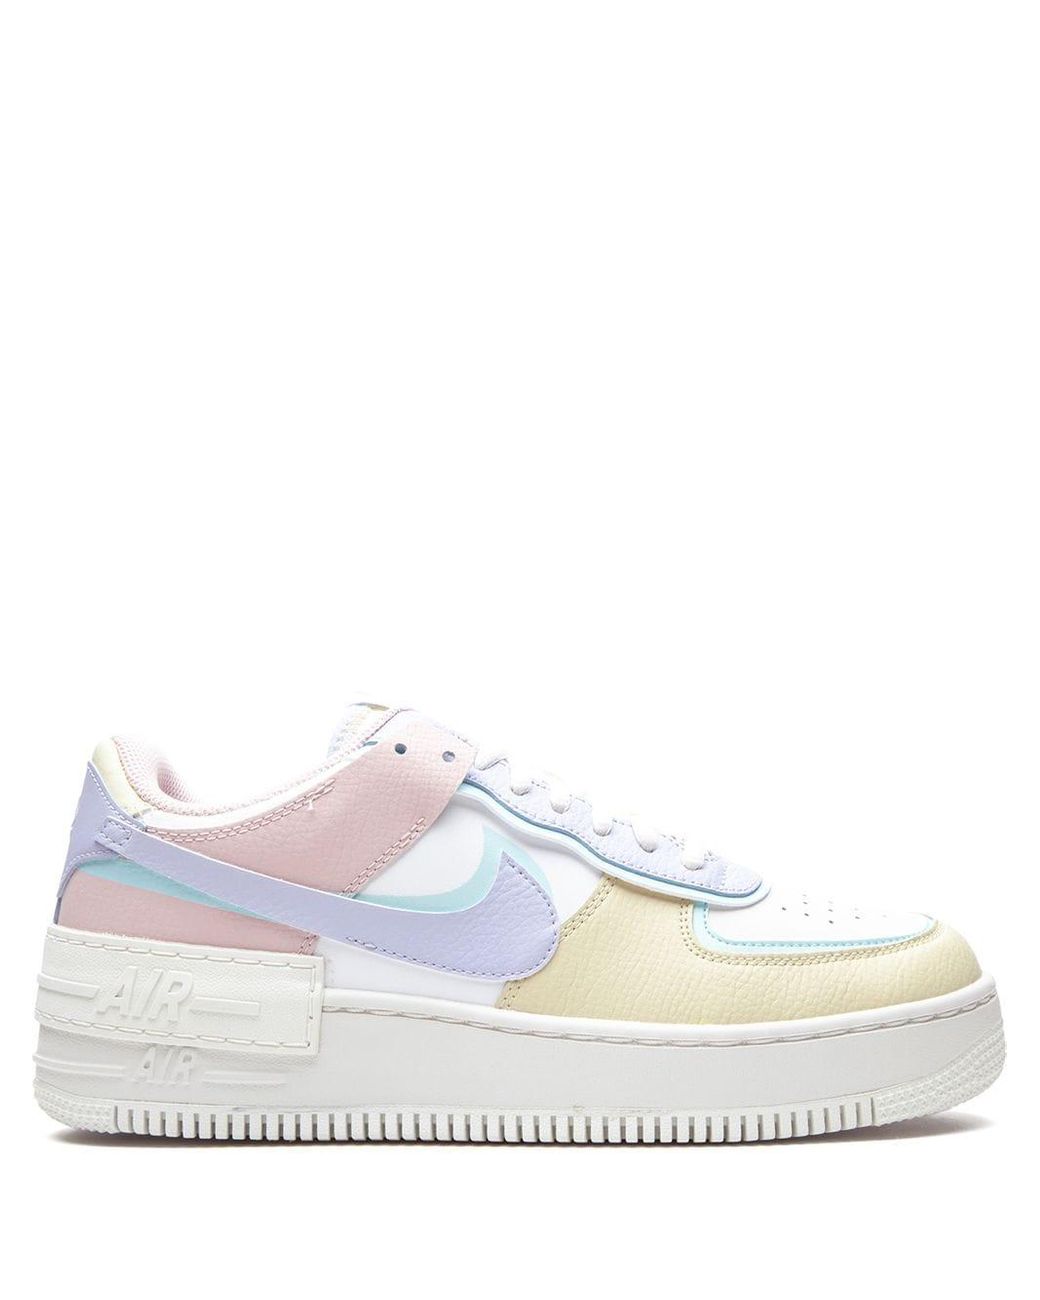 Nike Leather Air Force 1 Shadow Sneakers in White - Lyst